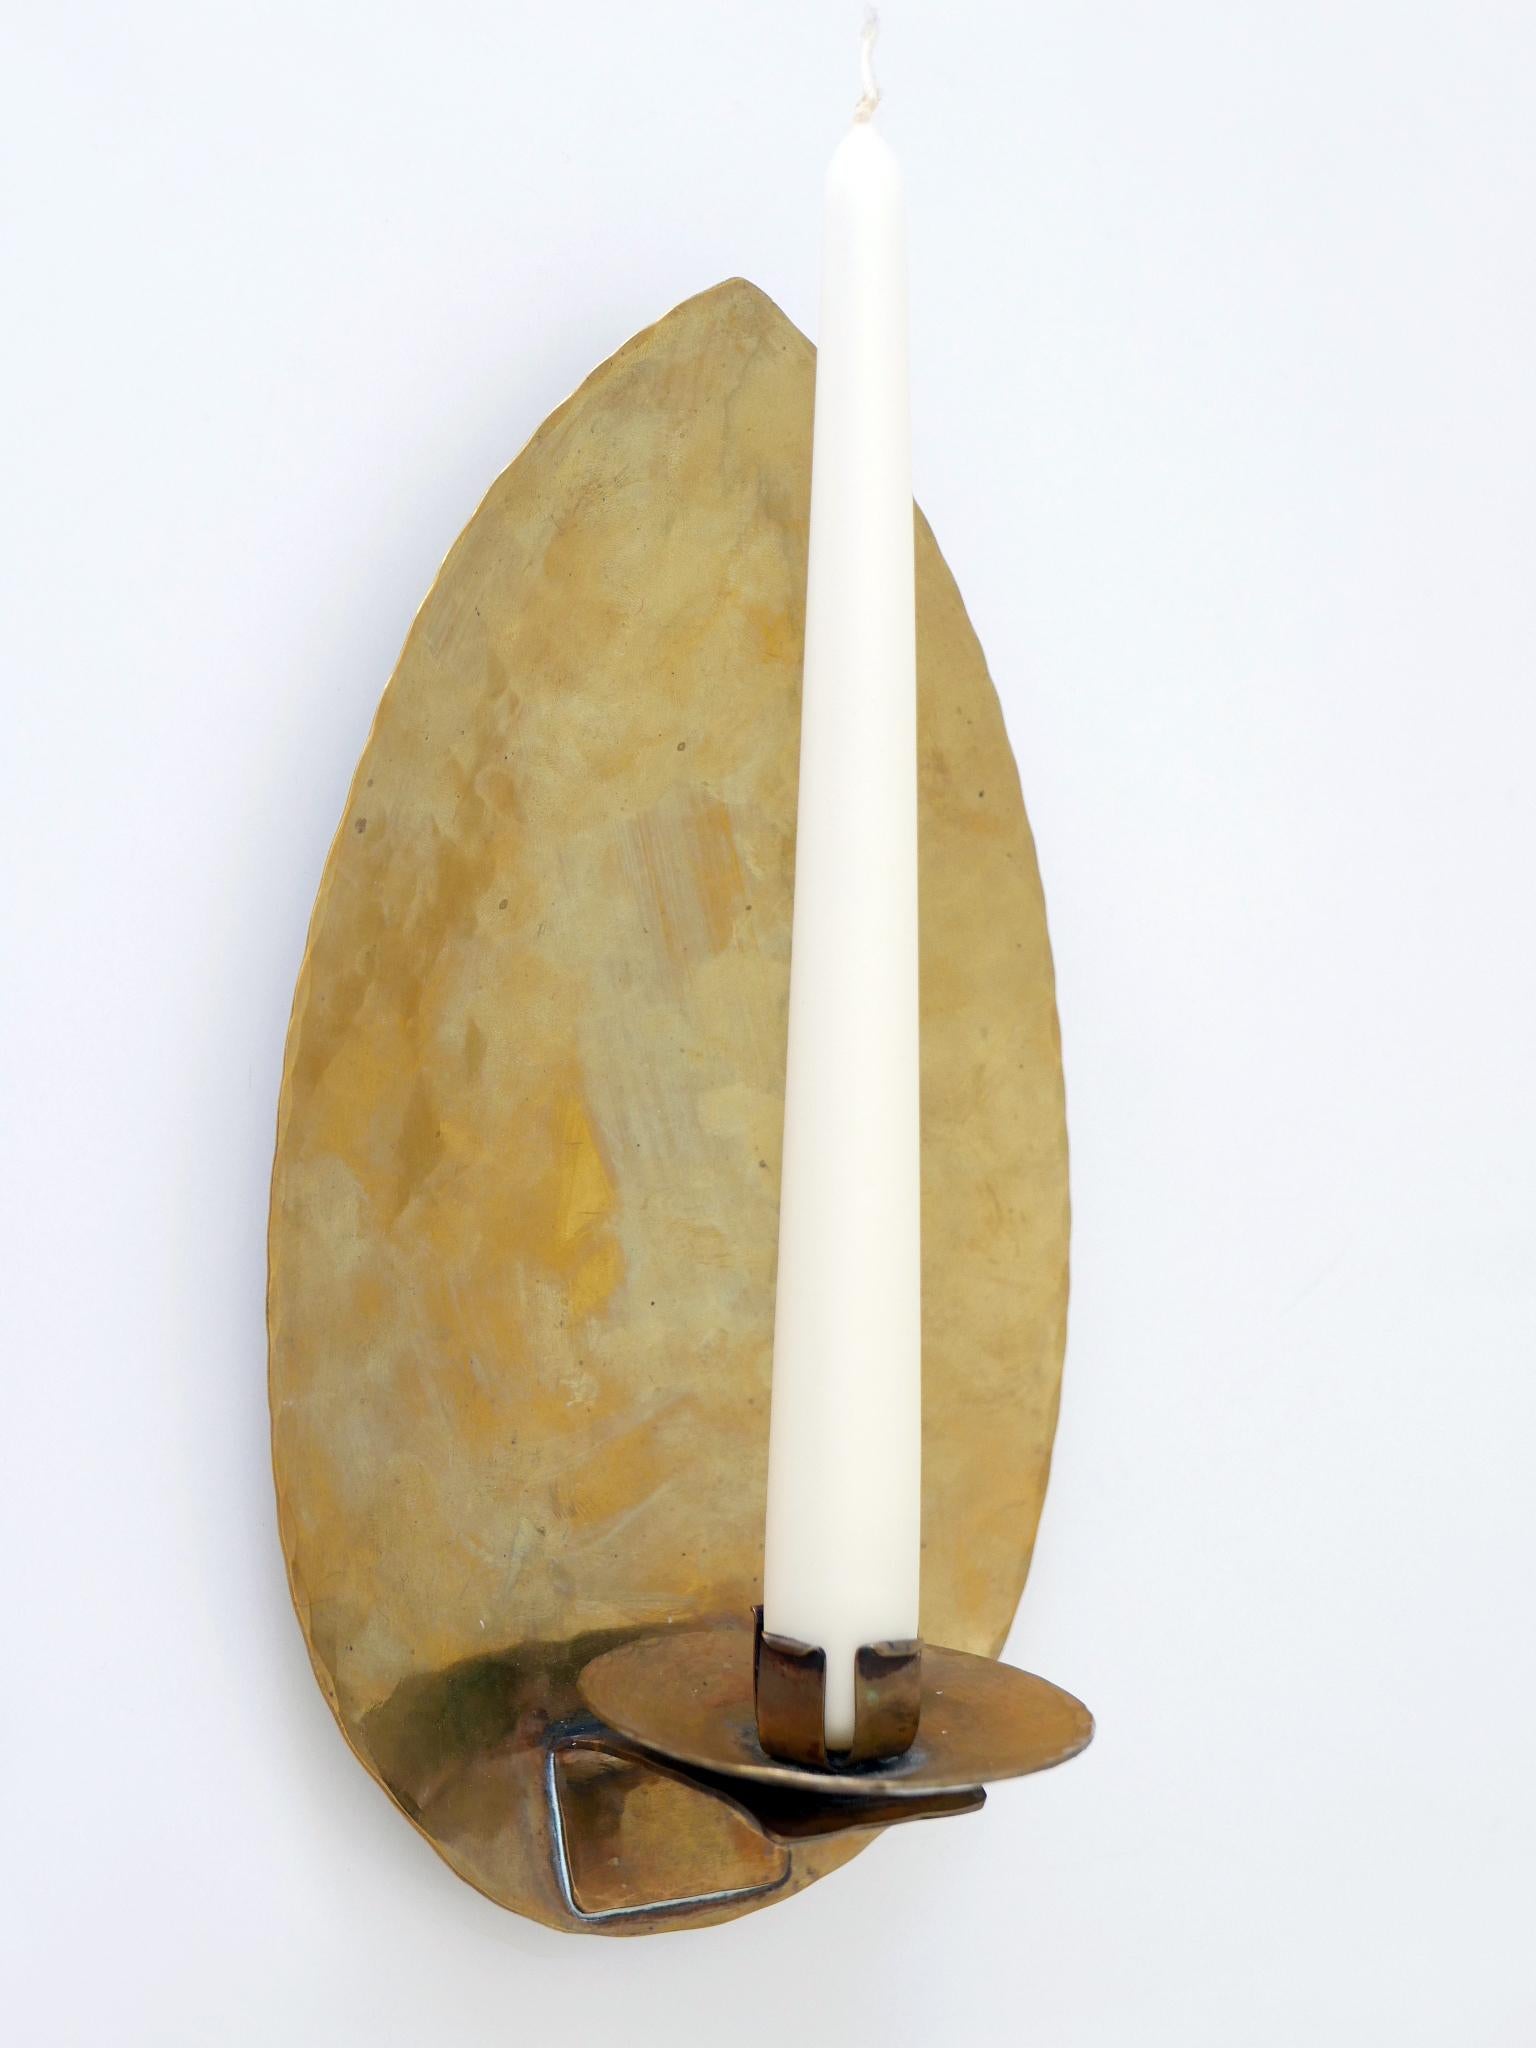 Elegant Hammered Brass Bauhaus Candle Sconce 1930s Germany For Sale 7